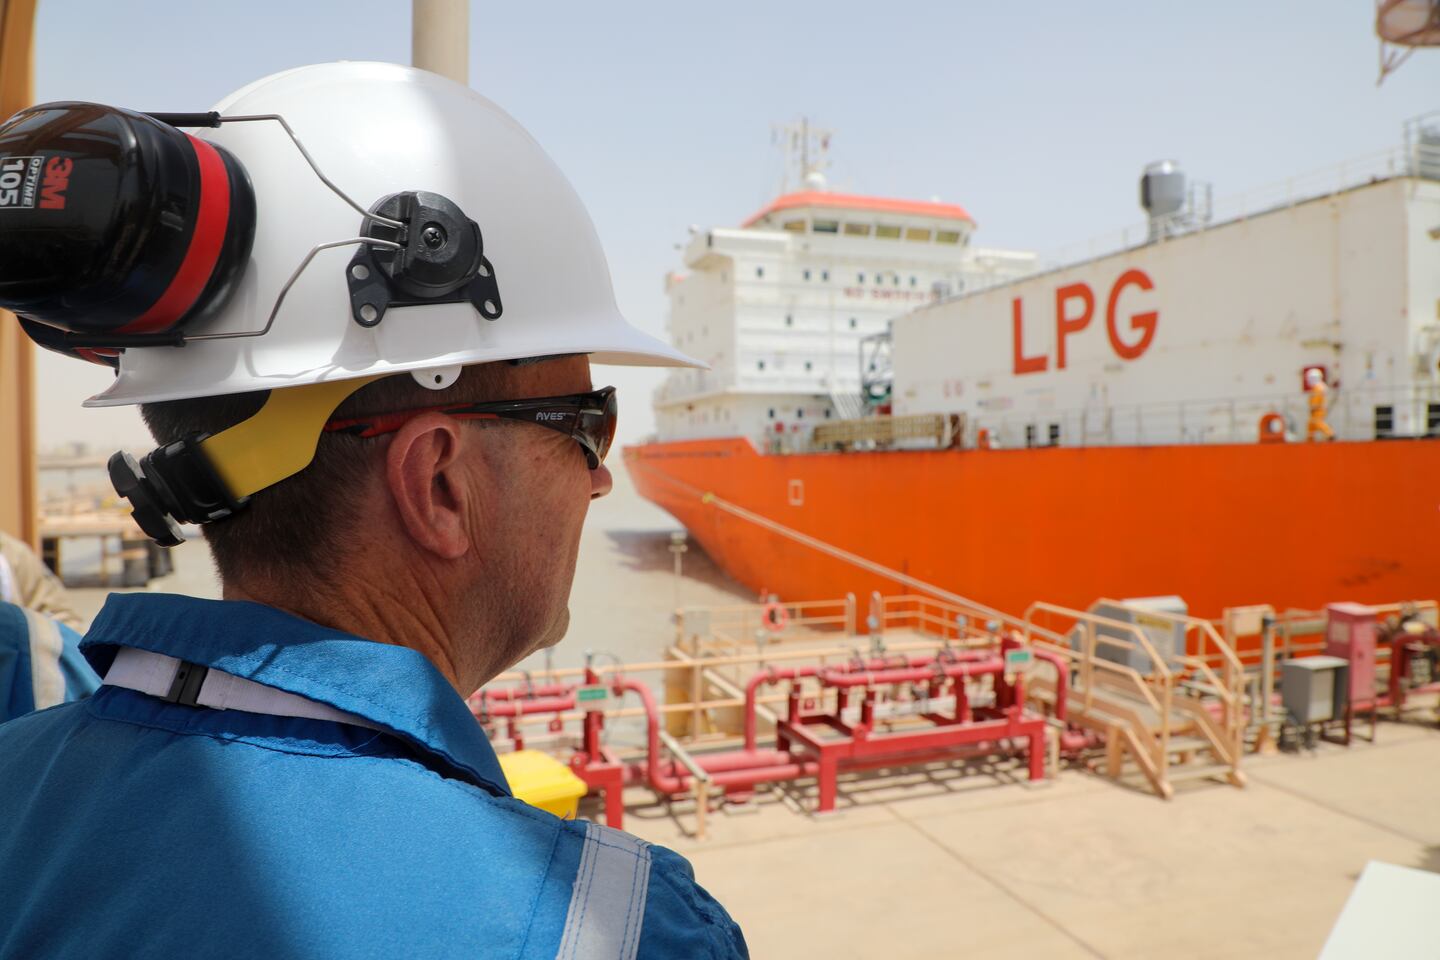 BGC can now load LPG on both pressurised and semi-refrigerated ships,. Photo: BGC